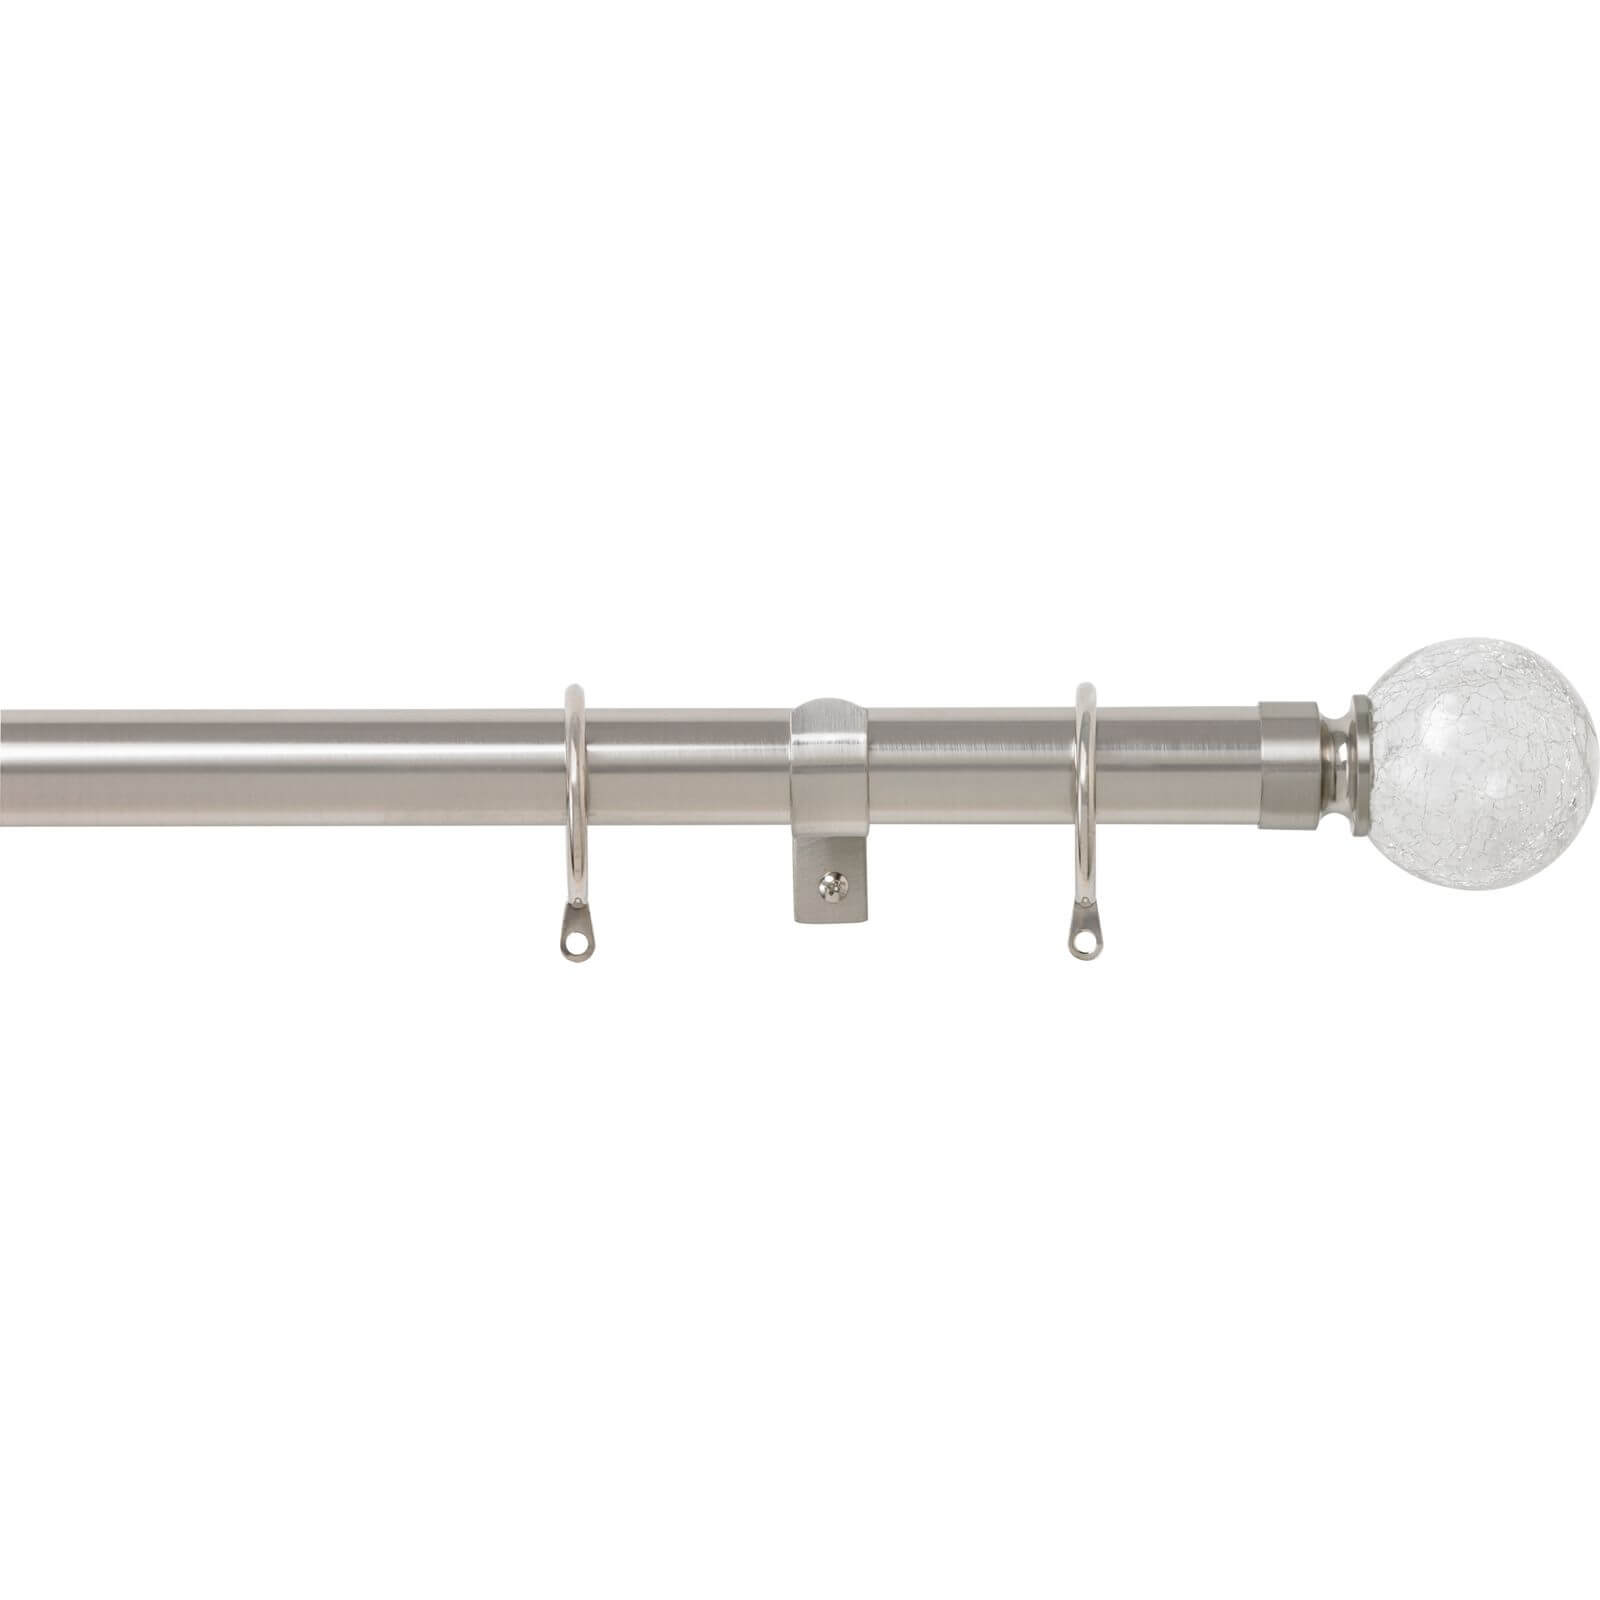 Satin Steel 28mm Fixed Curtain Pole Crackle 2.4m